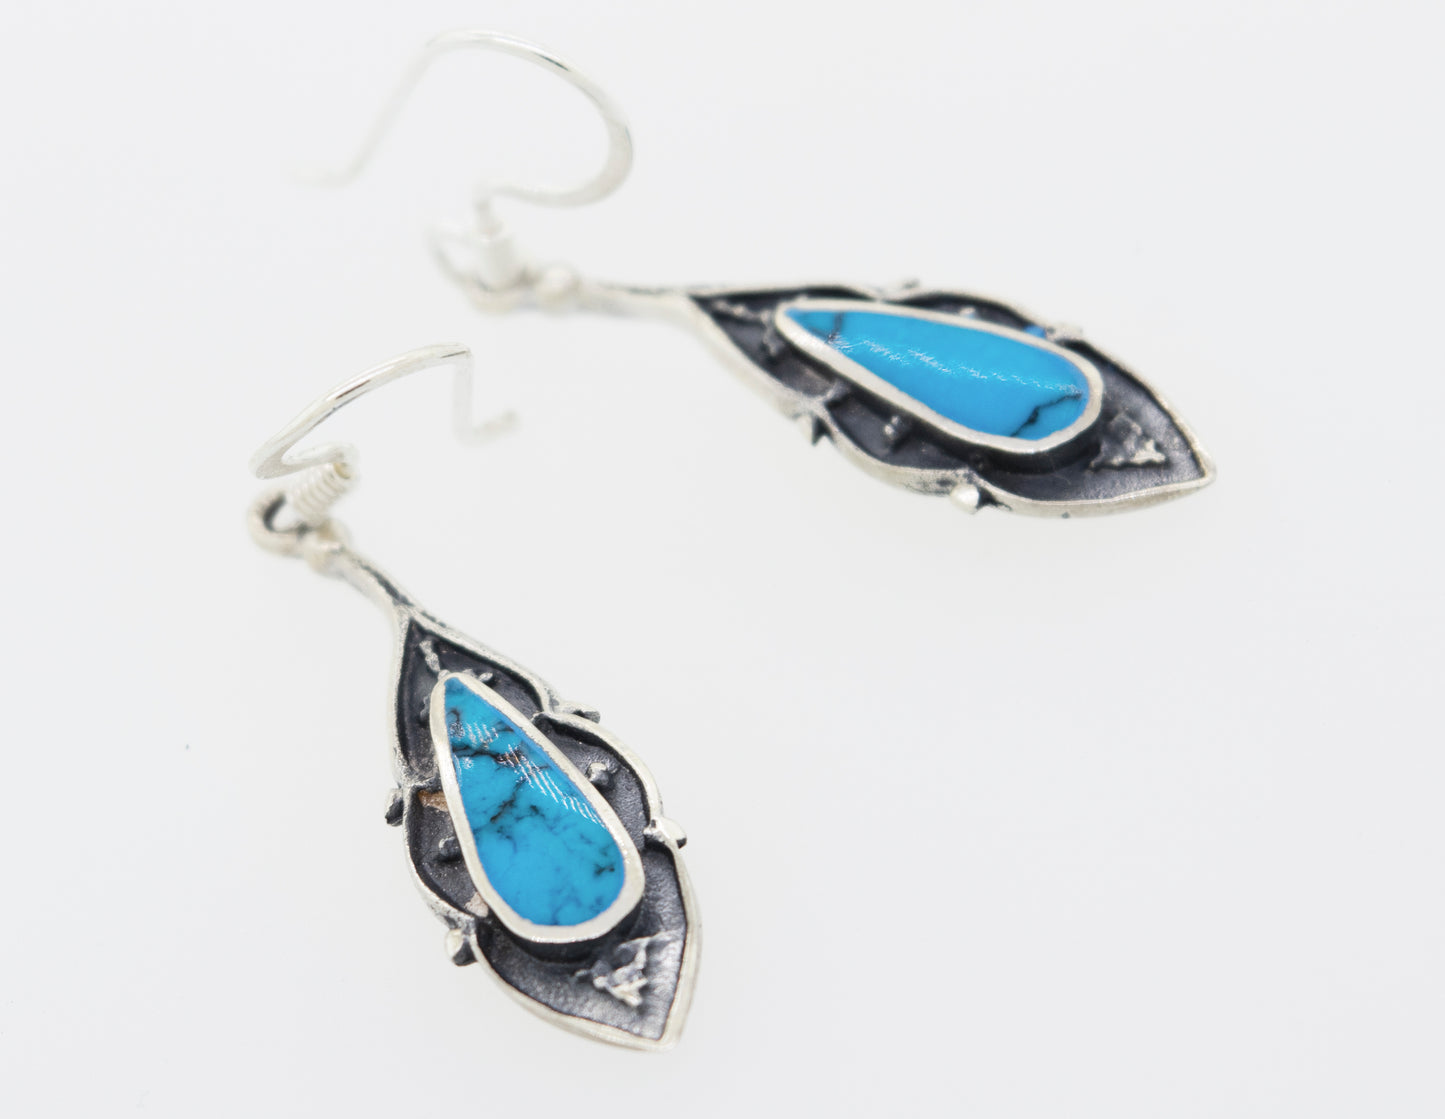 A pair of Super Silver Teardrop Shape Turquoise Earrings adorned with turquoise stones.